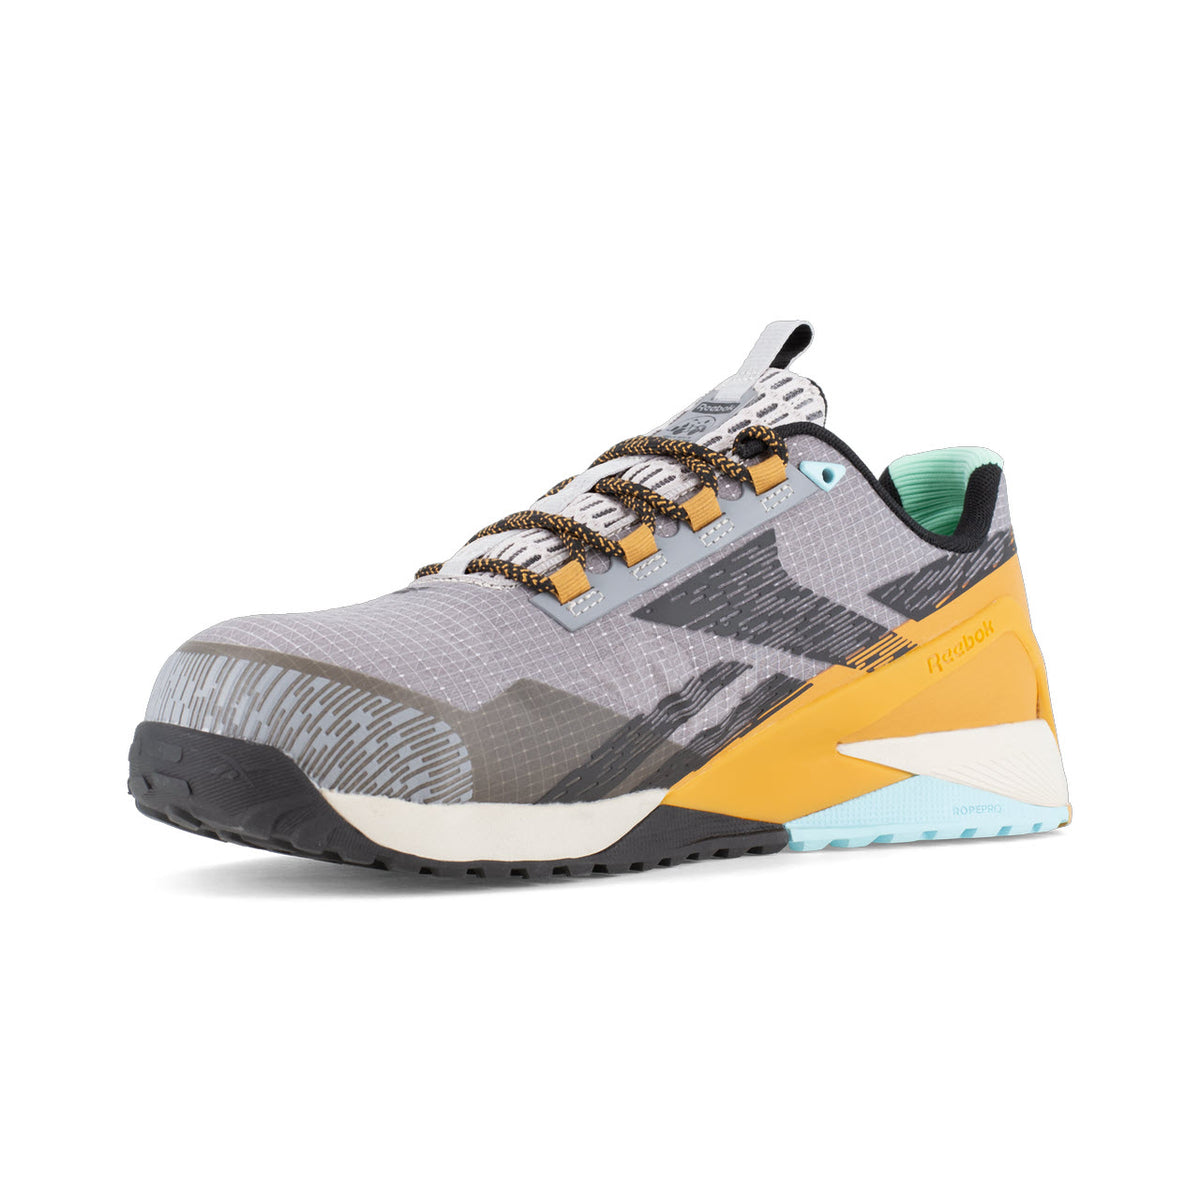 Side view of a modern athletic Reebok Nano X1 shoe with a patterned grey upper and accents of yellow and aqua, featuring Floatride Energy Foam.